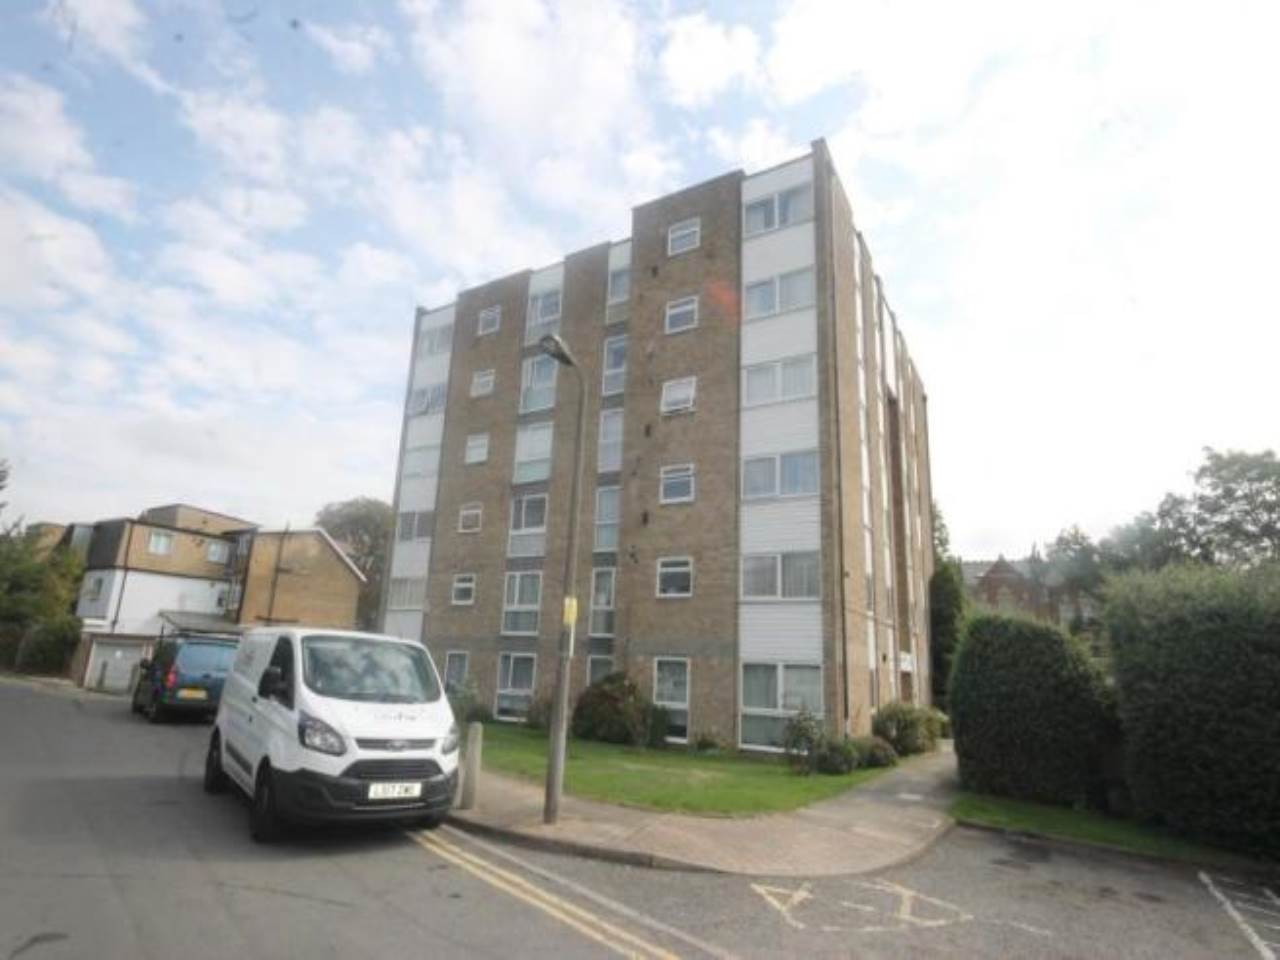 As the seller’s sole agents, we are pleased to offer For Sale this two-bedroom Second floor apartment. This property is bright and spacious throughout and accommodation offers two double bedrooms with fitted cupboards to the master, a very bright and airy 18’ lounge, a separate fitted kitchen and bathroom with a separate WC. The property comes with the added benefit of an allocated detached garage and a passenger lift in the block. The location offers very easy access to Palmer's Green Station and many local shopping and recreational facilities. We understand the unexpired lease term is in excess of 130 years and the boiler has recently been replaced. Early viewing advised. Offers in excess of £300,000 are invited for the leasehold interest. 